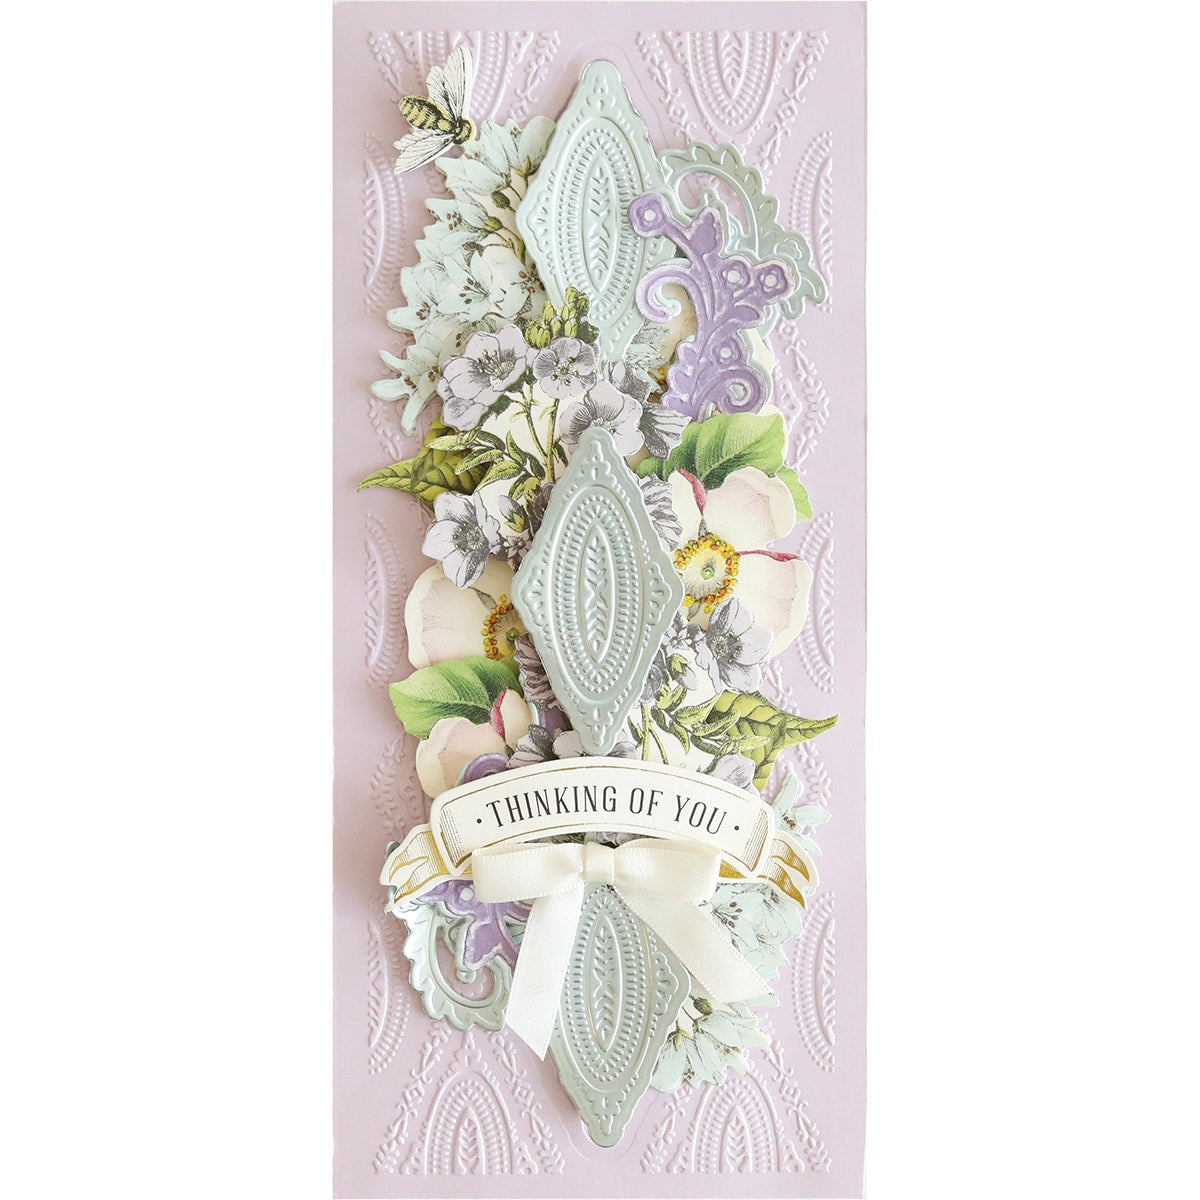 a card with a ribbon and flowers on it.